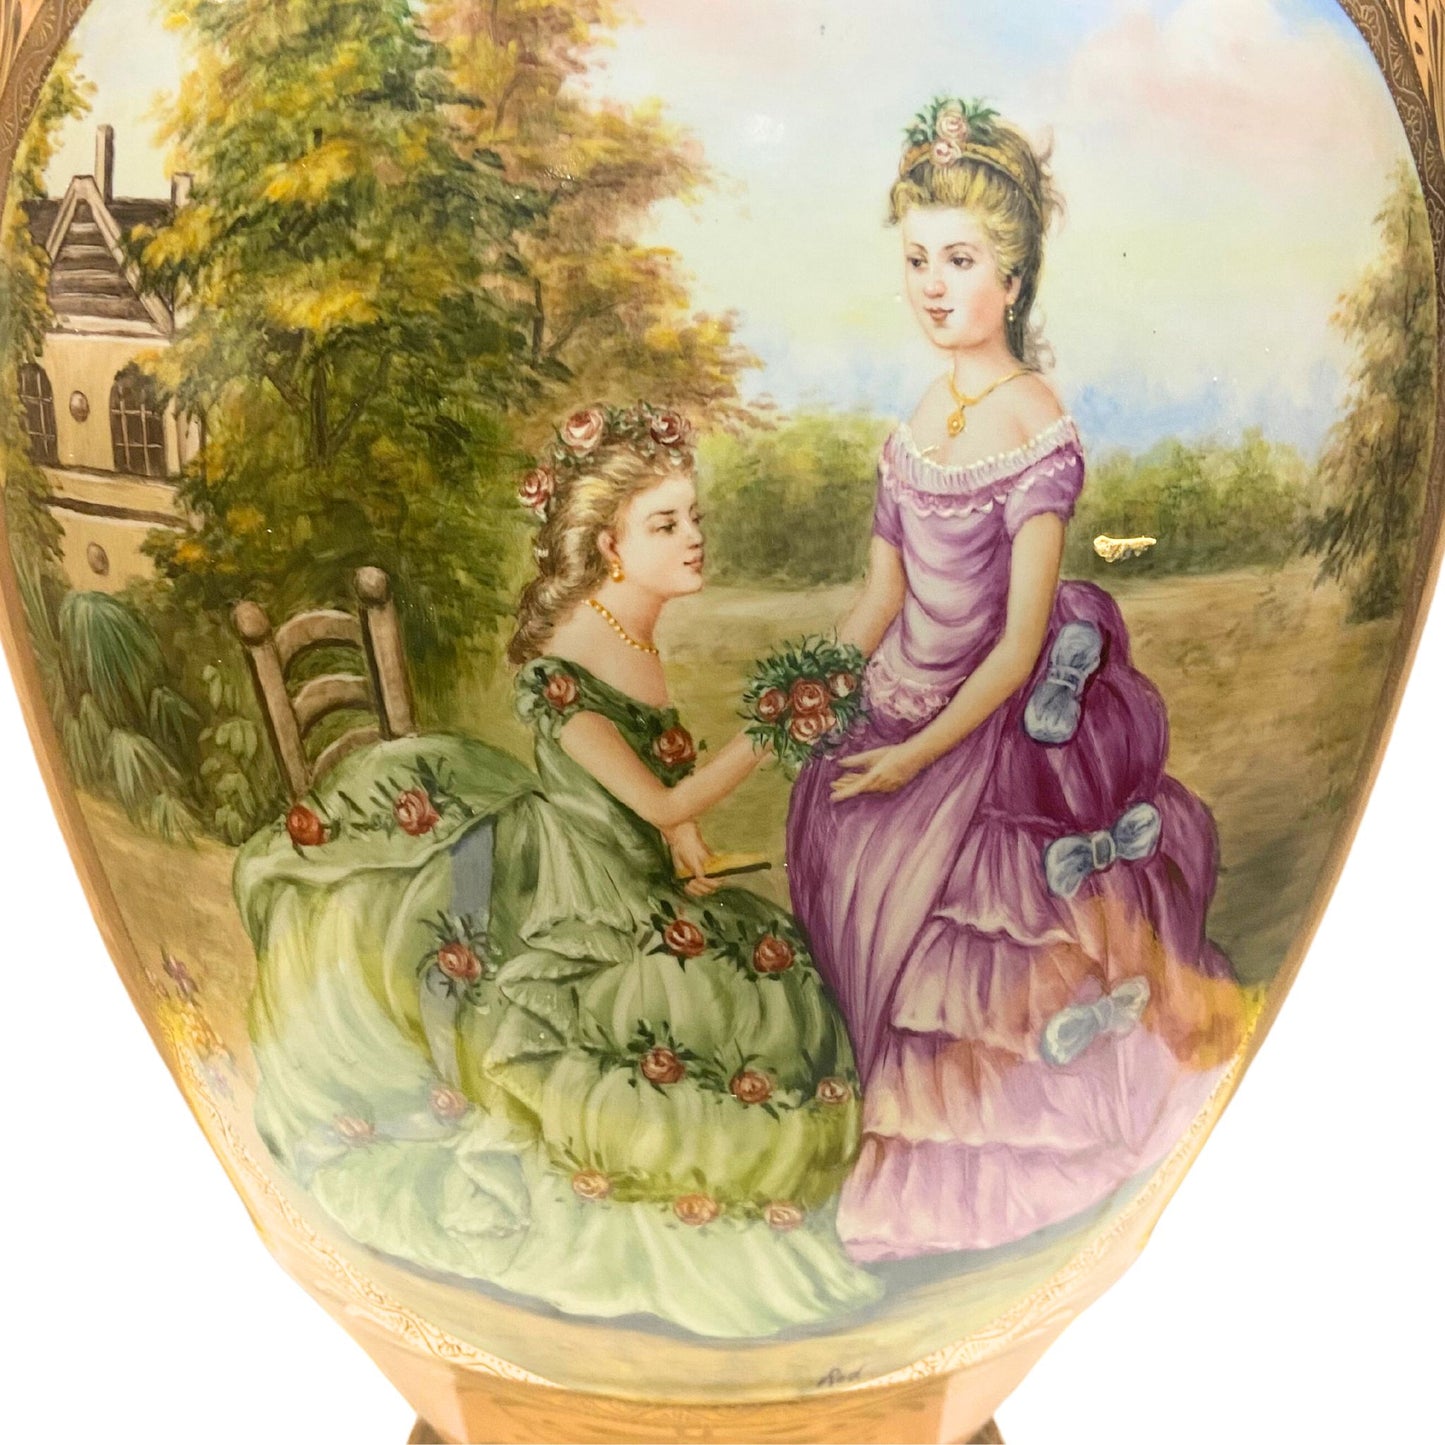 Hand-Painted Gold Rococo Style Vases